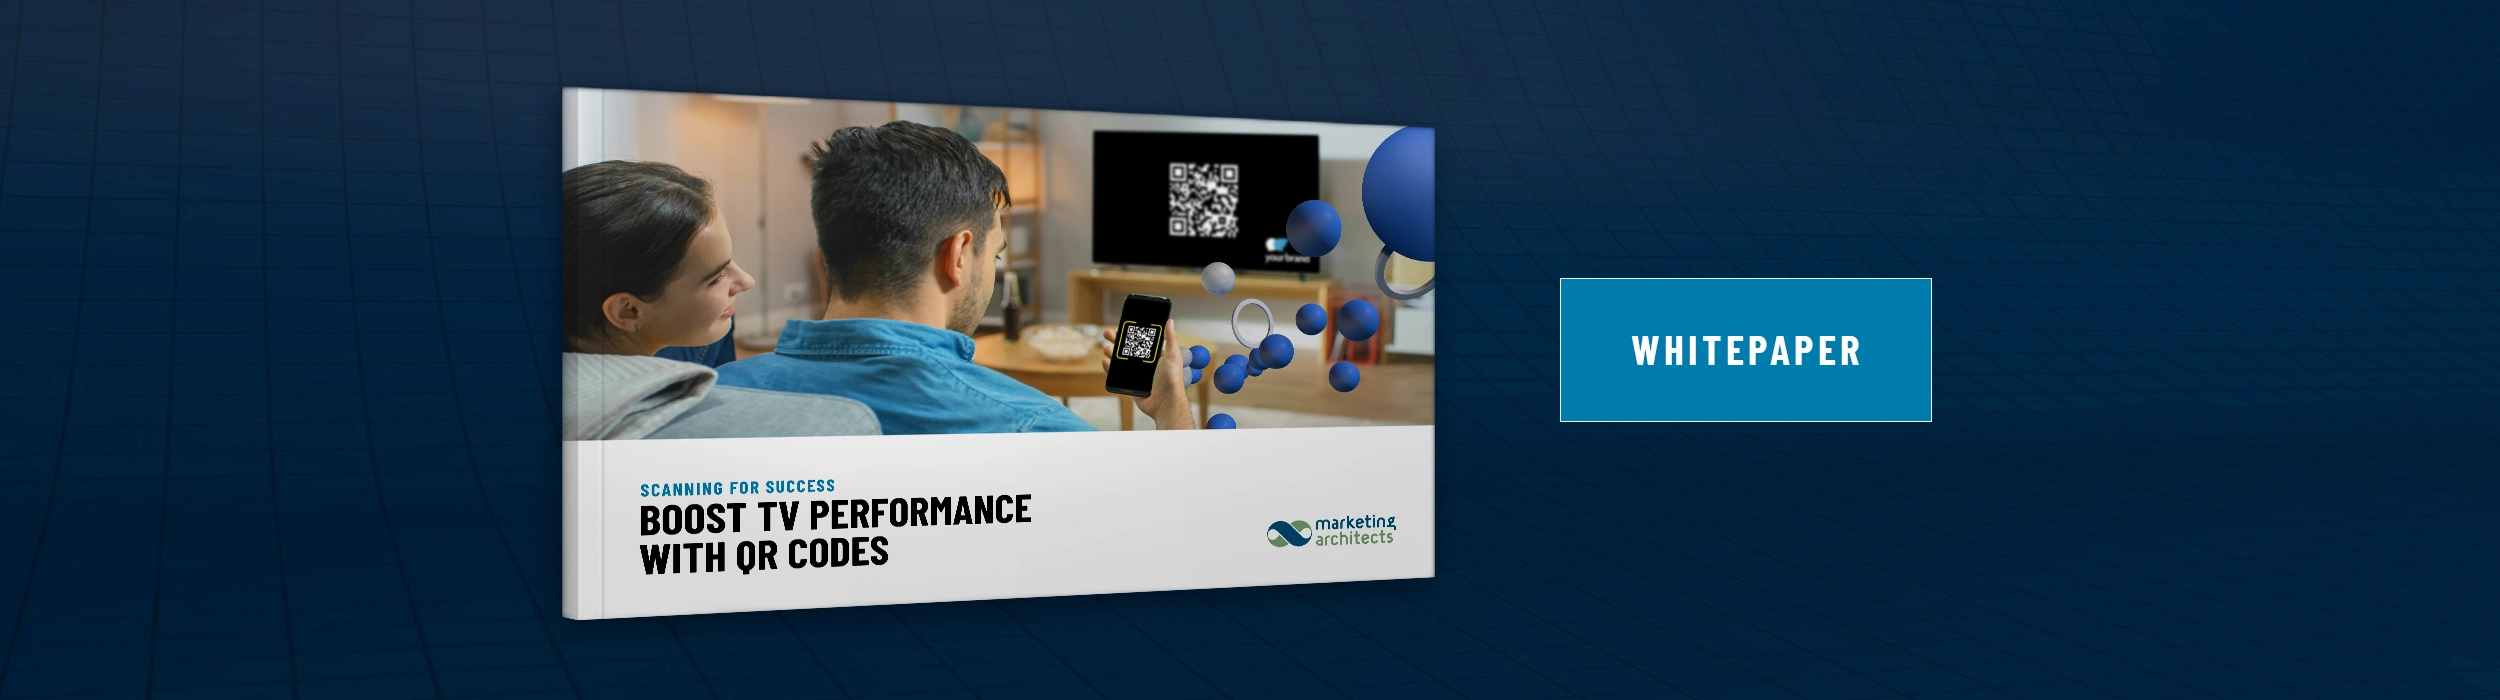 How to Boost TV Performance With QR Codes: Original QR Code Research